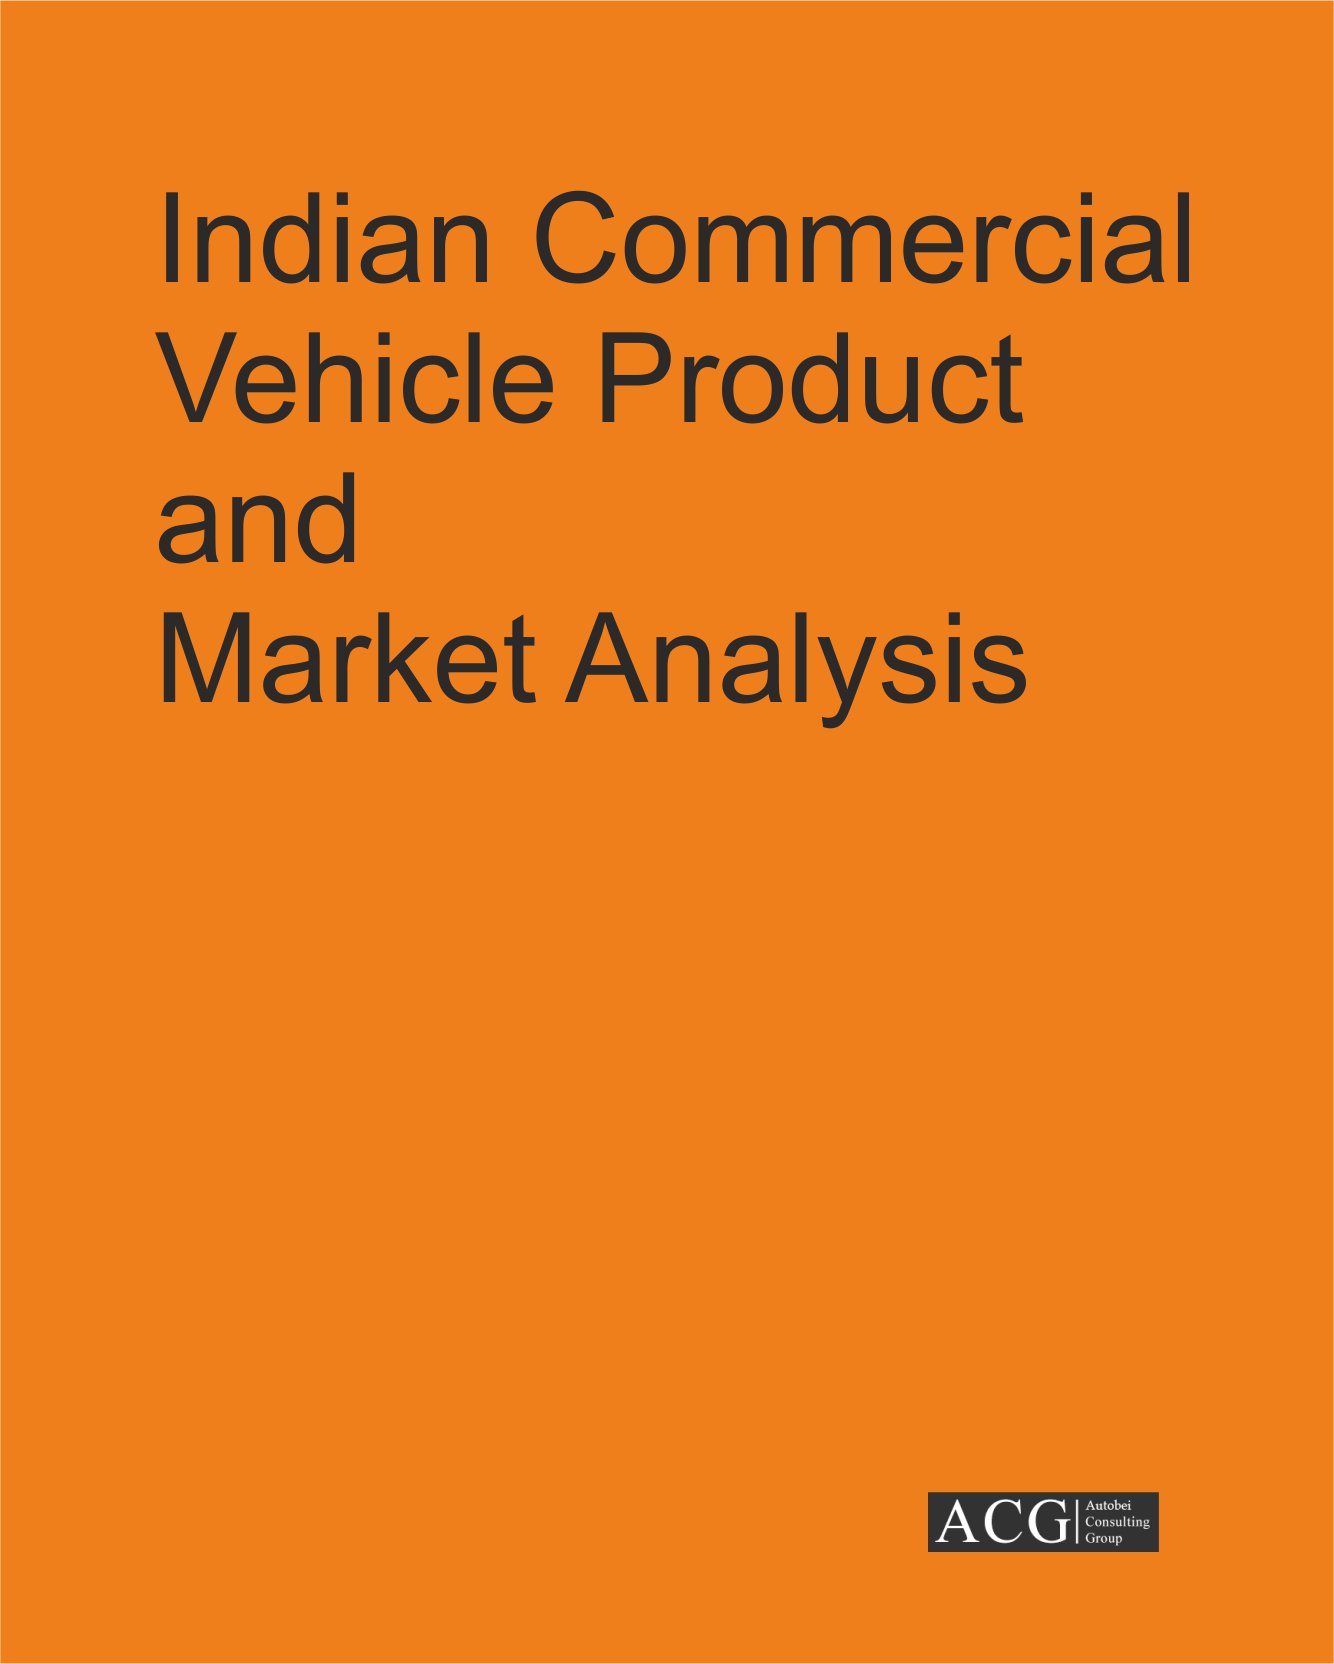 Indian Commercial Vehicle Product and Market Analysis